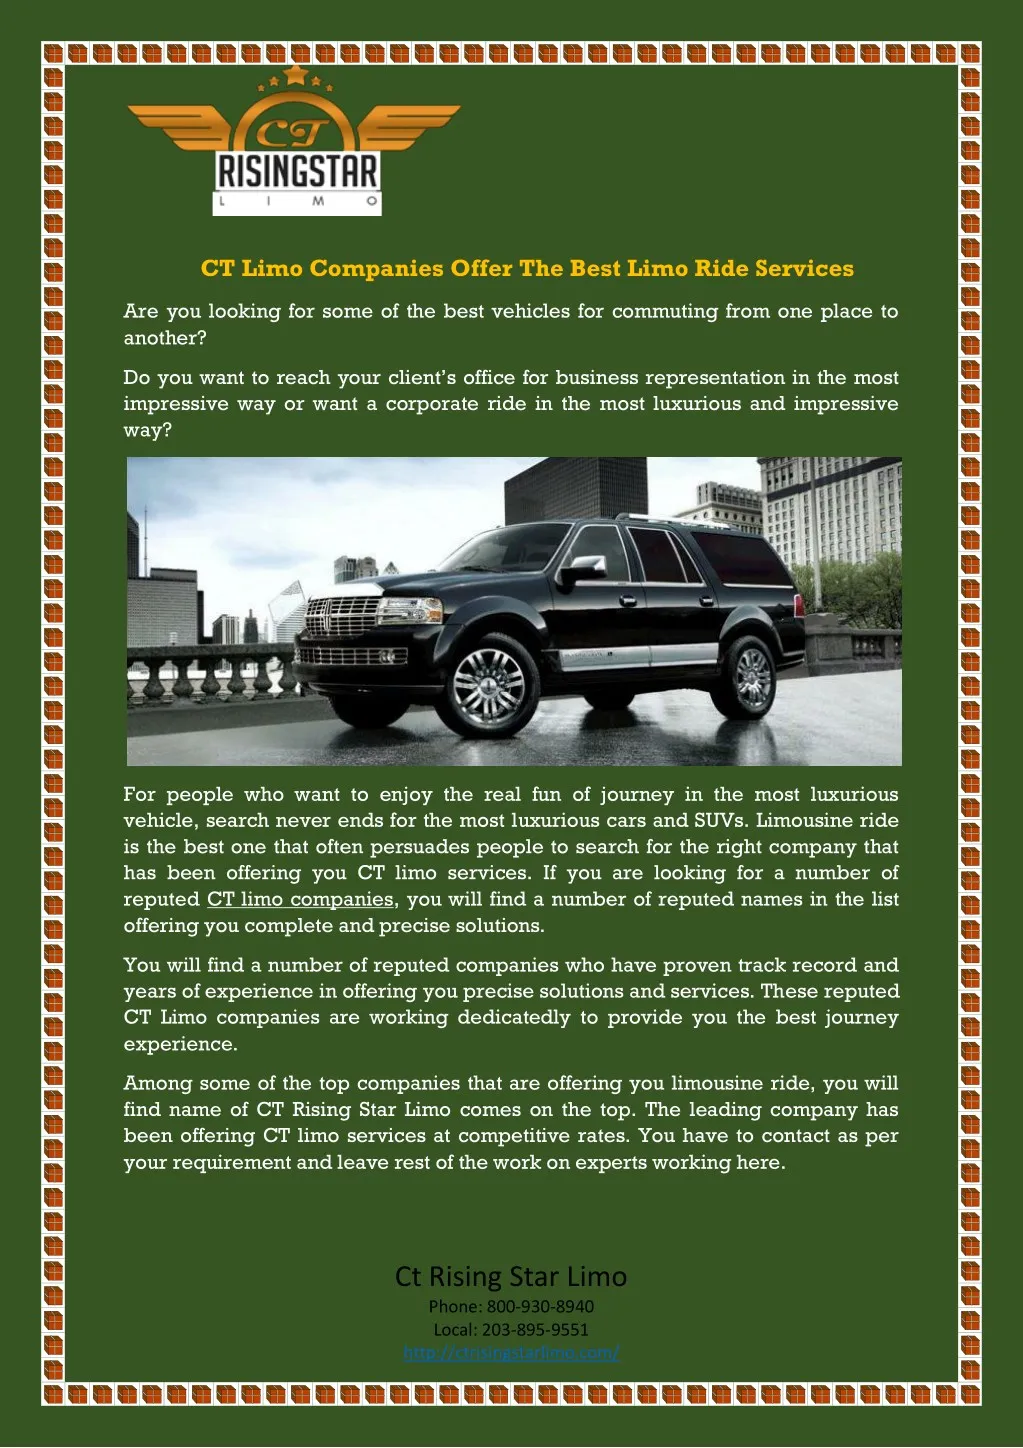 ct limo companies offer the best limo ride